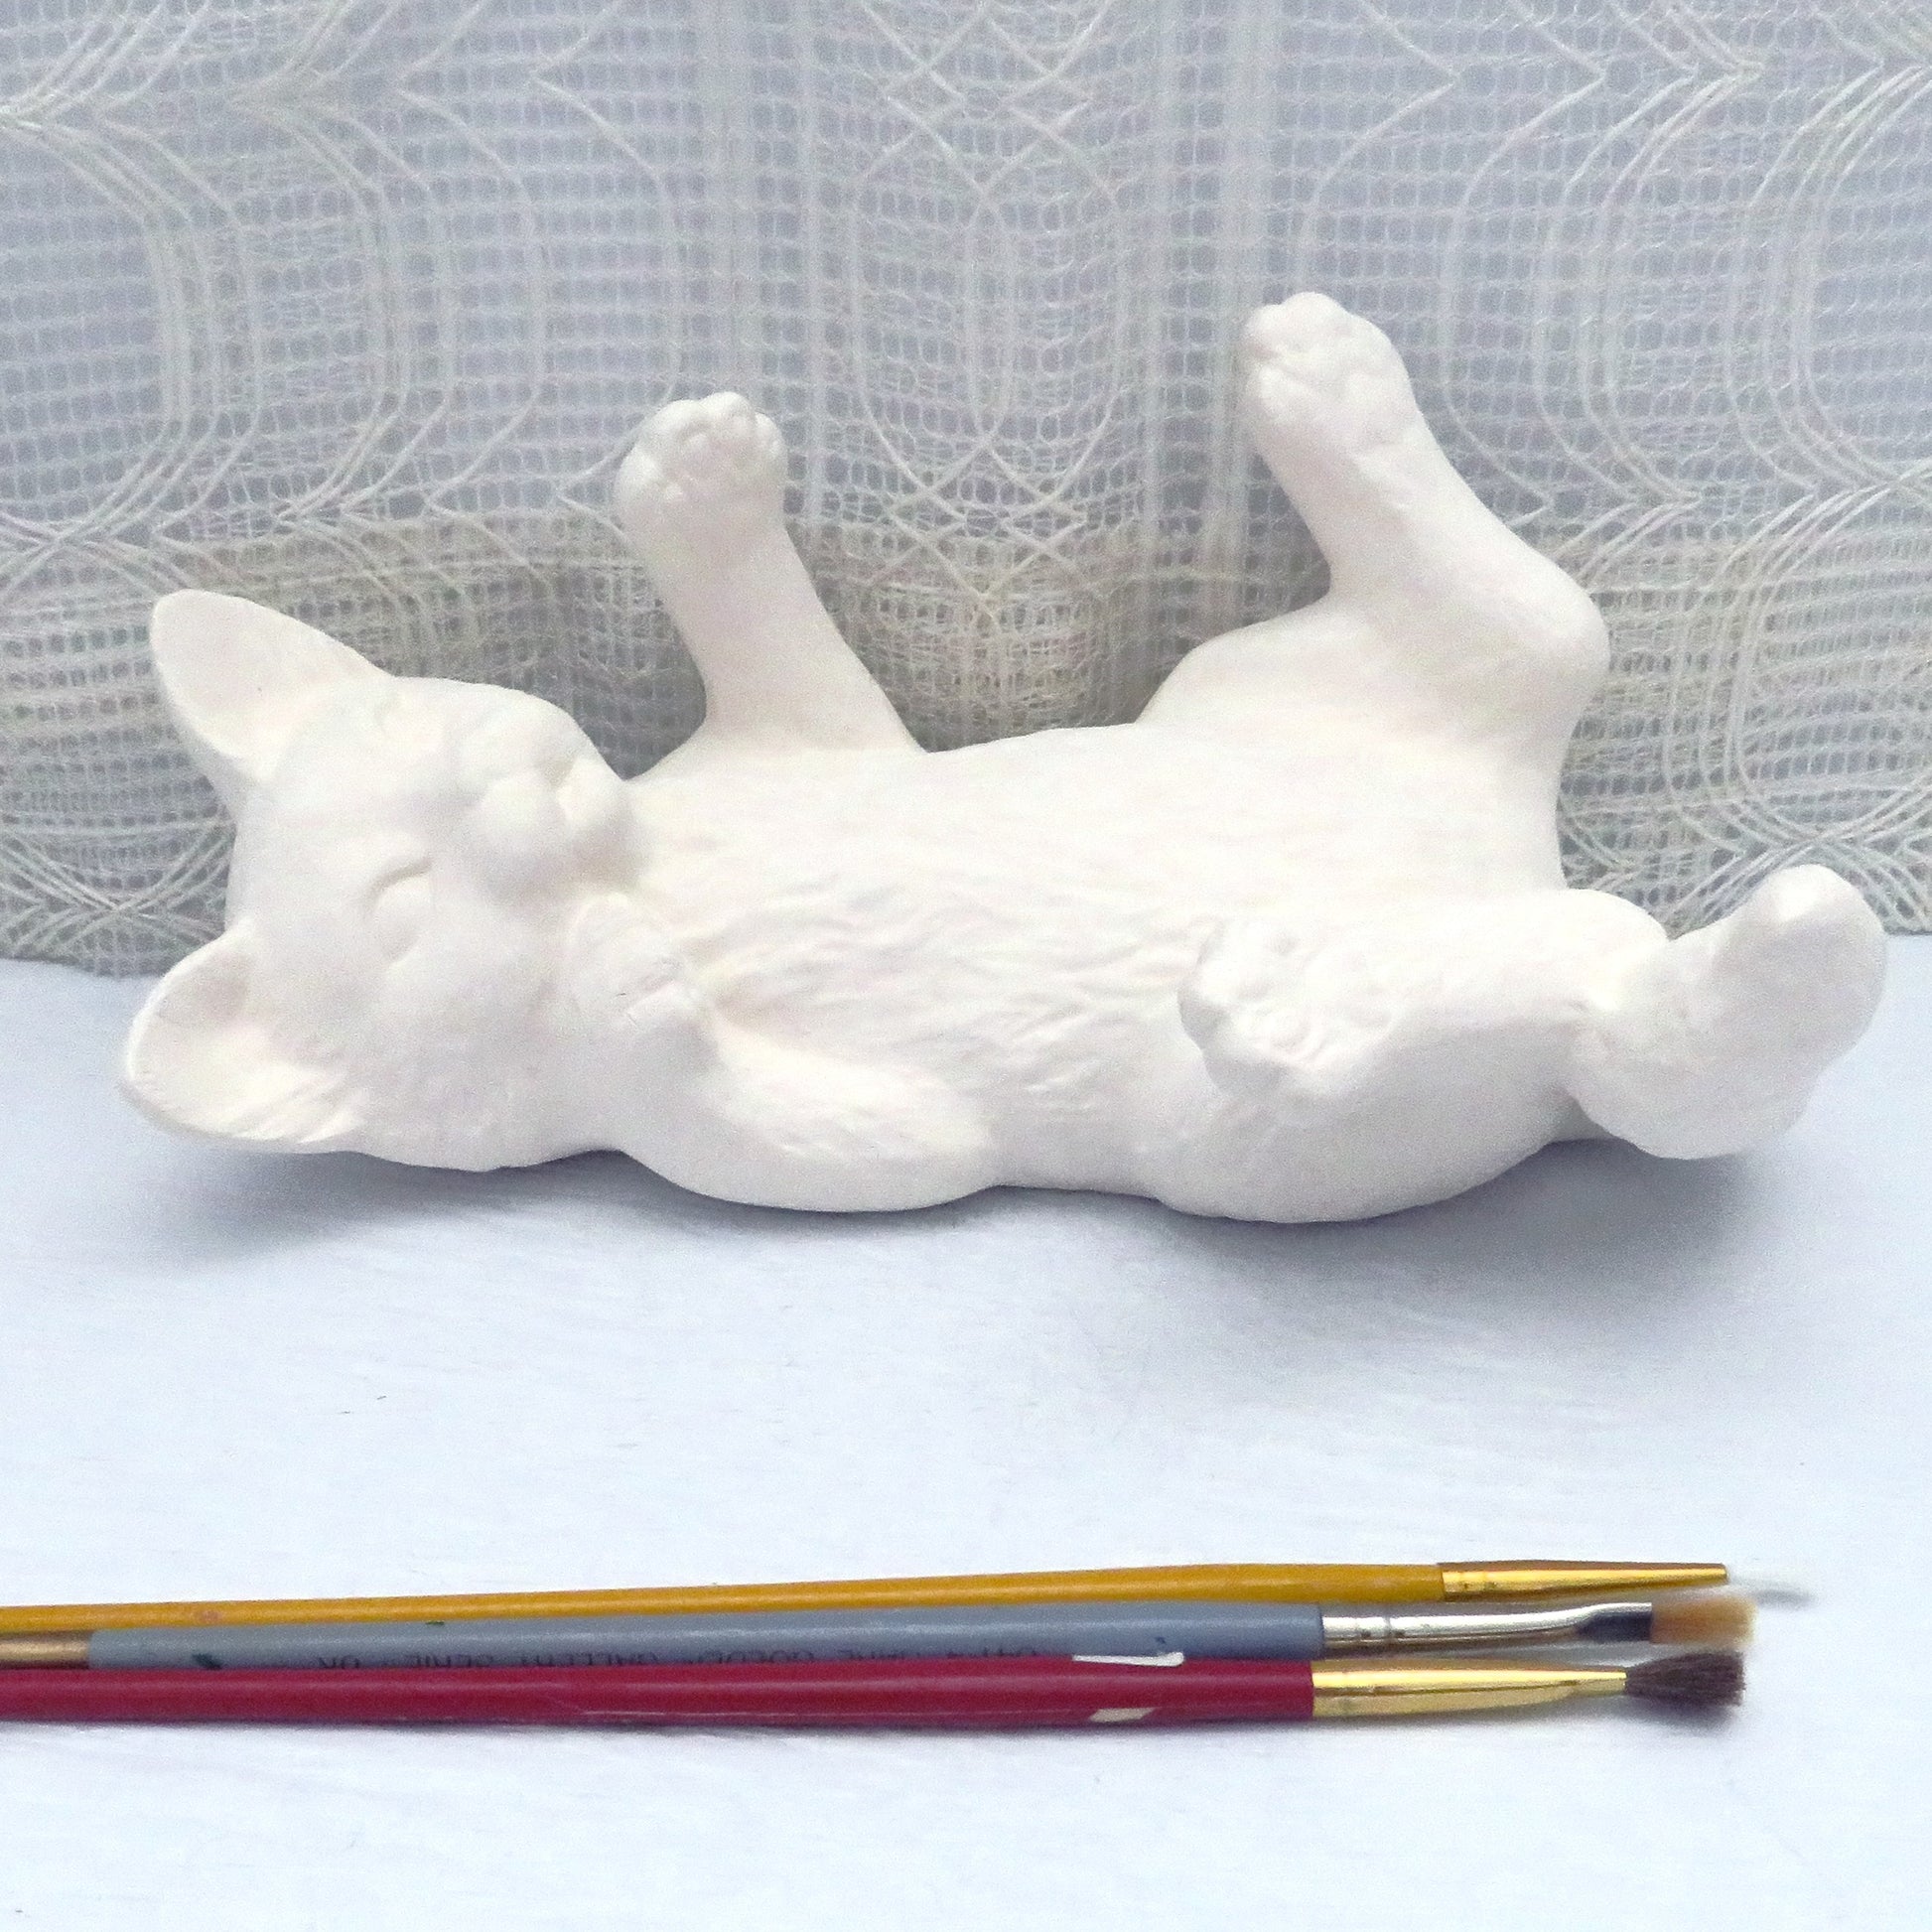 Ready to paint ceramic cat figurine positioned on his back with its legs in the air on a pale blue surface.  Facing camera.  Several paint brushes lying next to it.